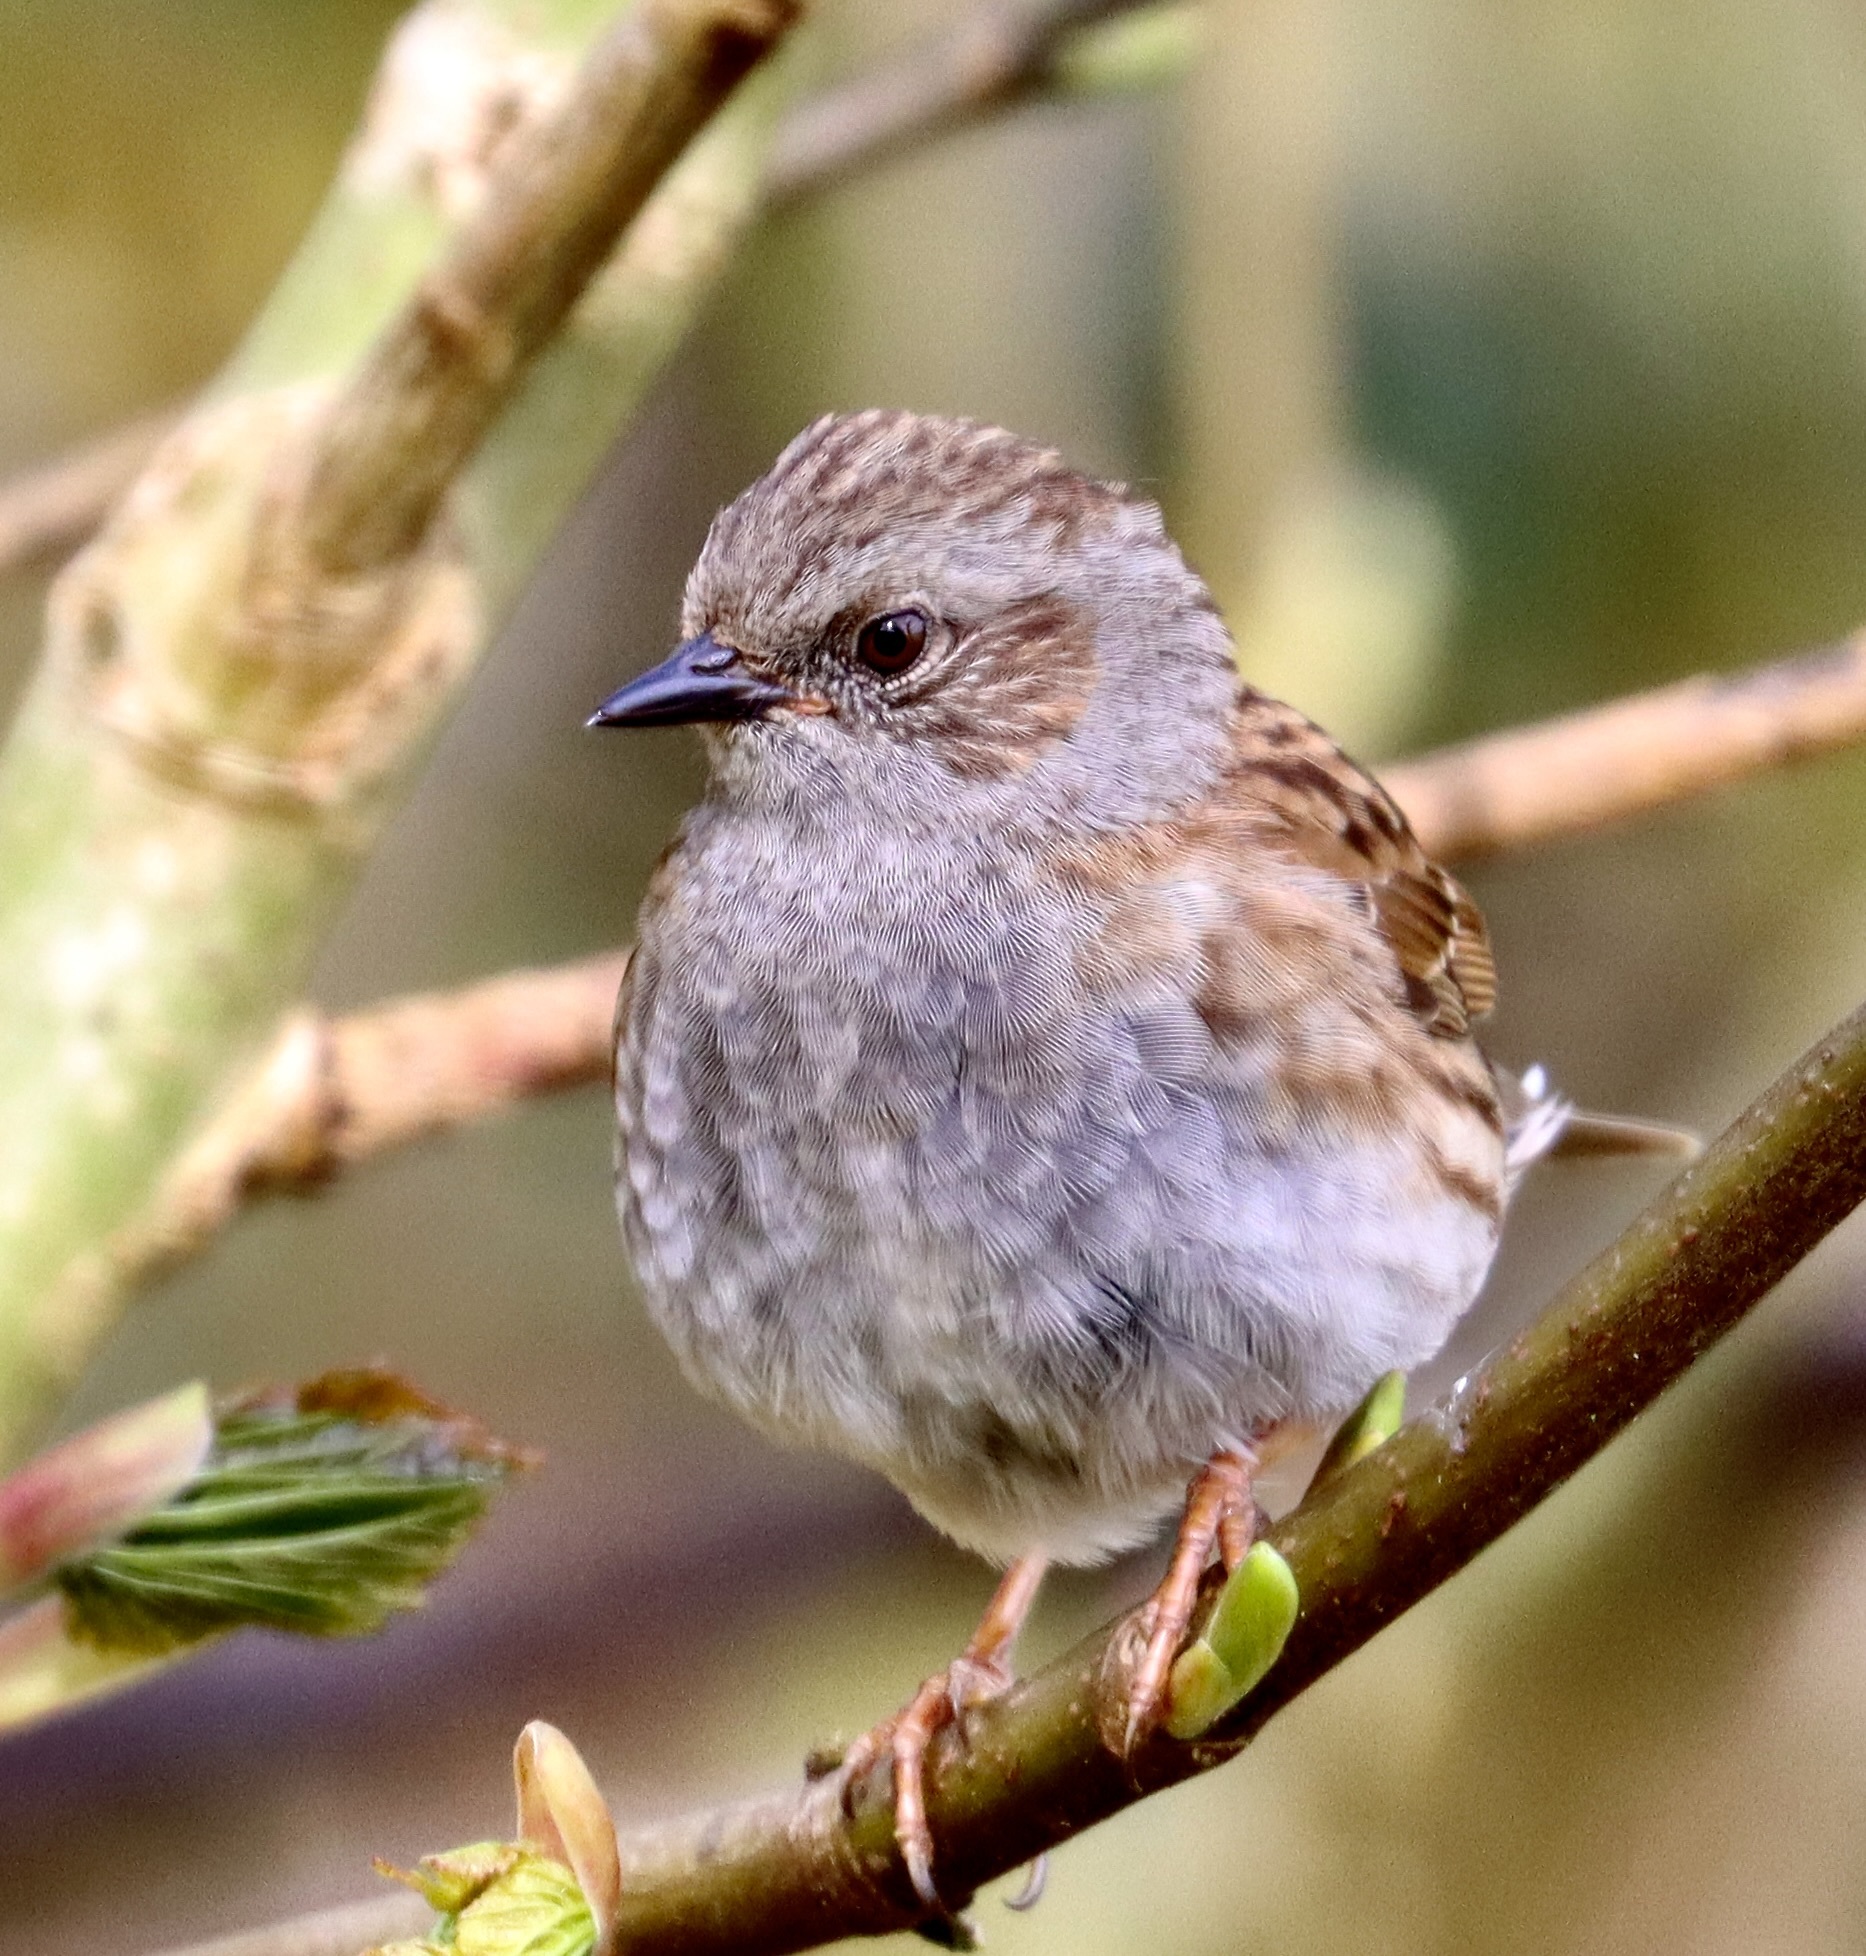 A dunnock in Marbury by Terry Gregory